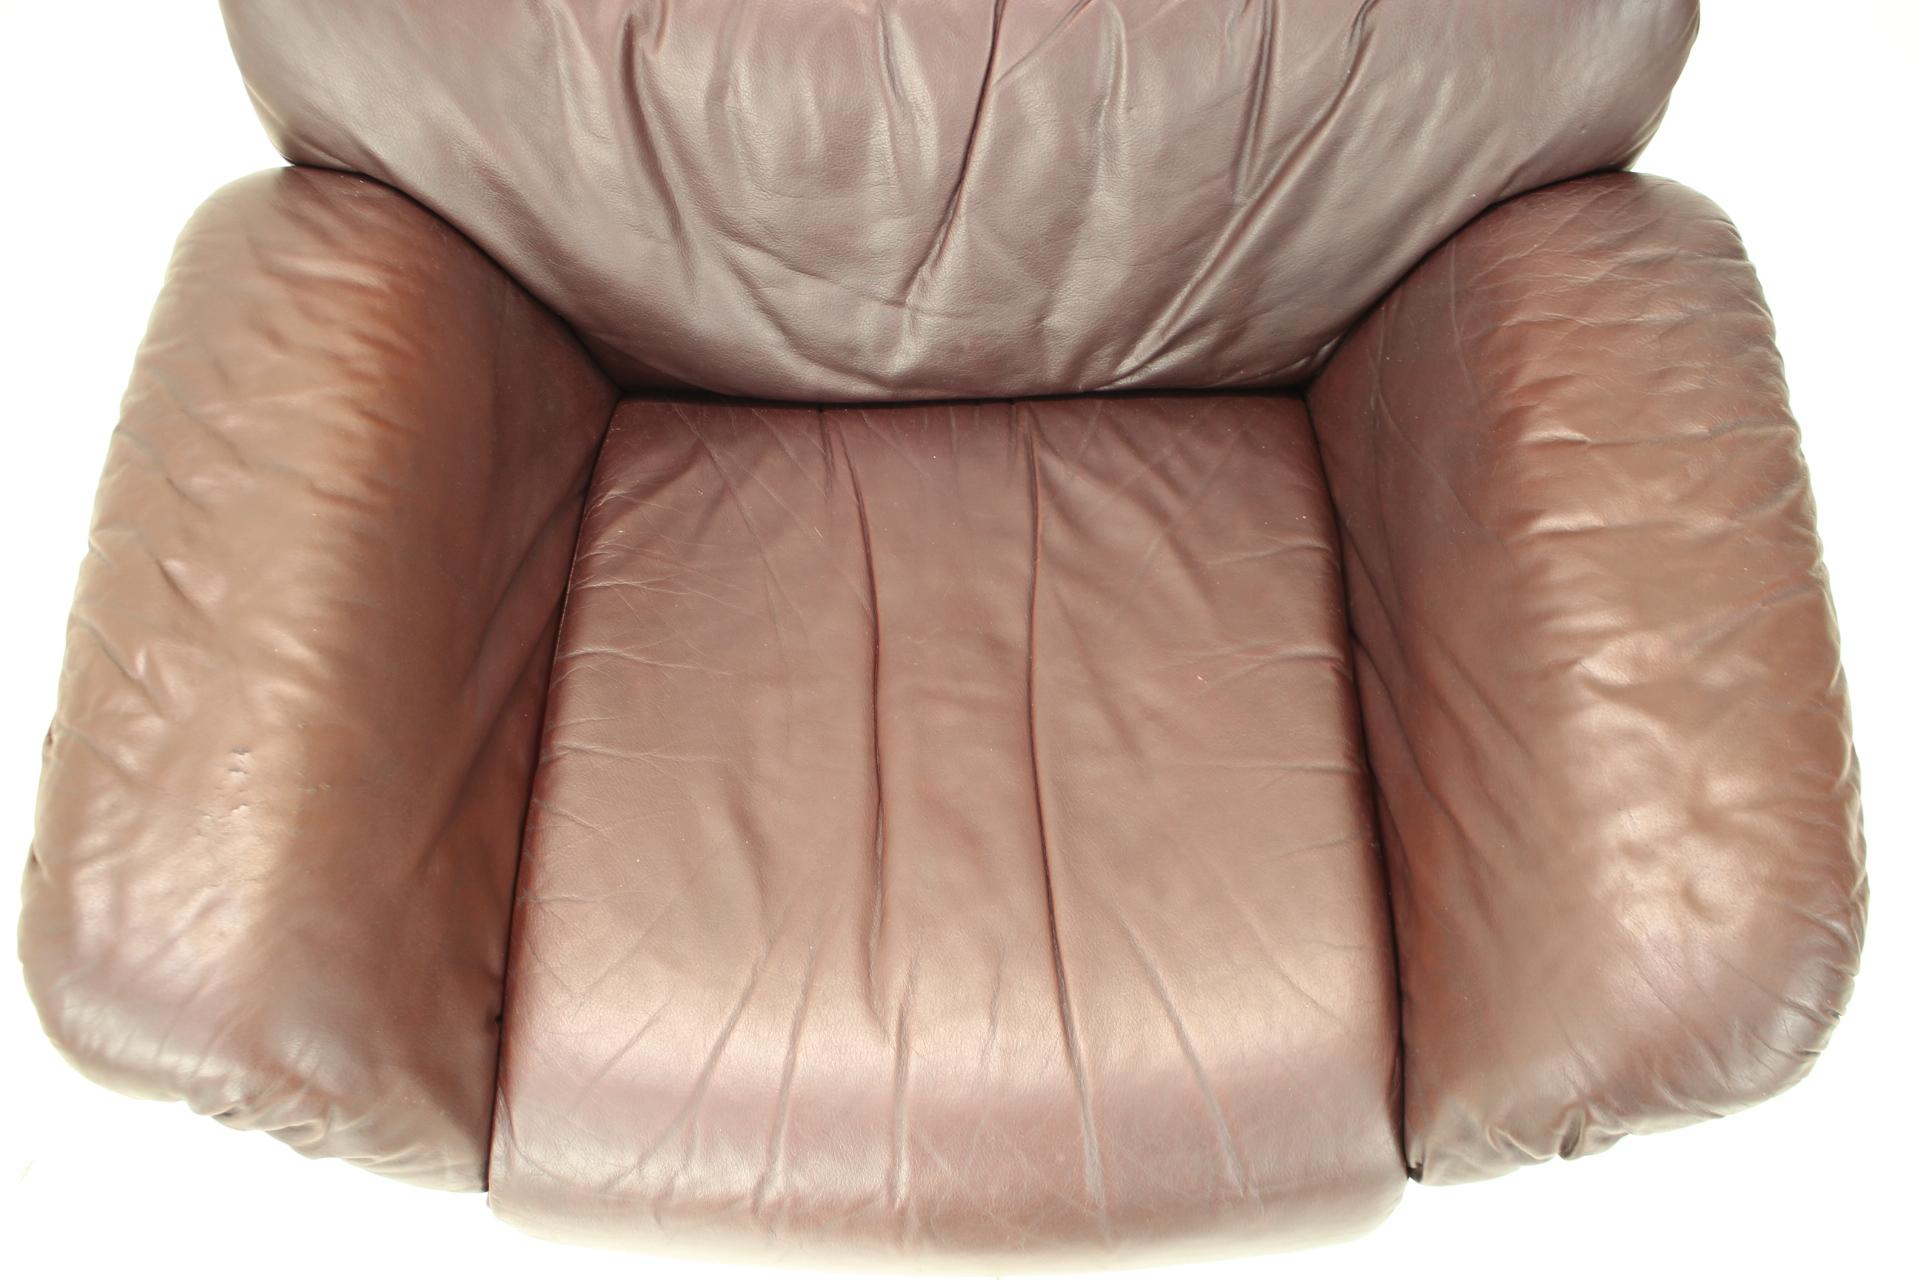 Large Scandinavian Adjustable Leather Armchair by Peem, 1970s, Finland For Sale 6